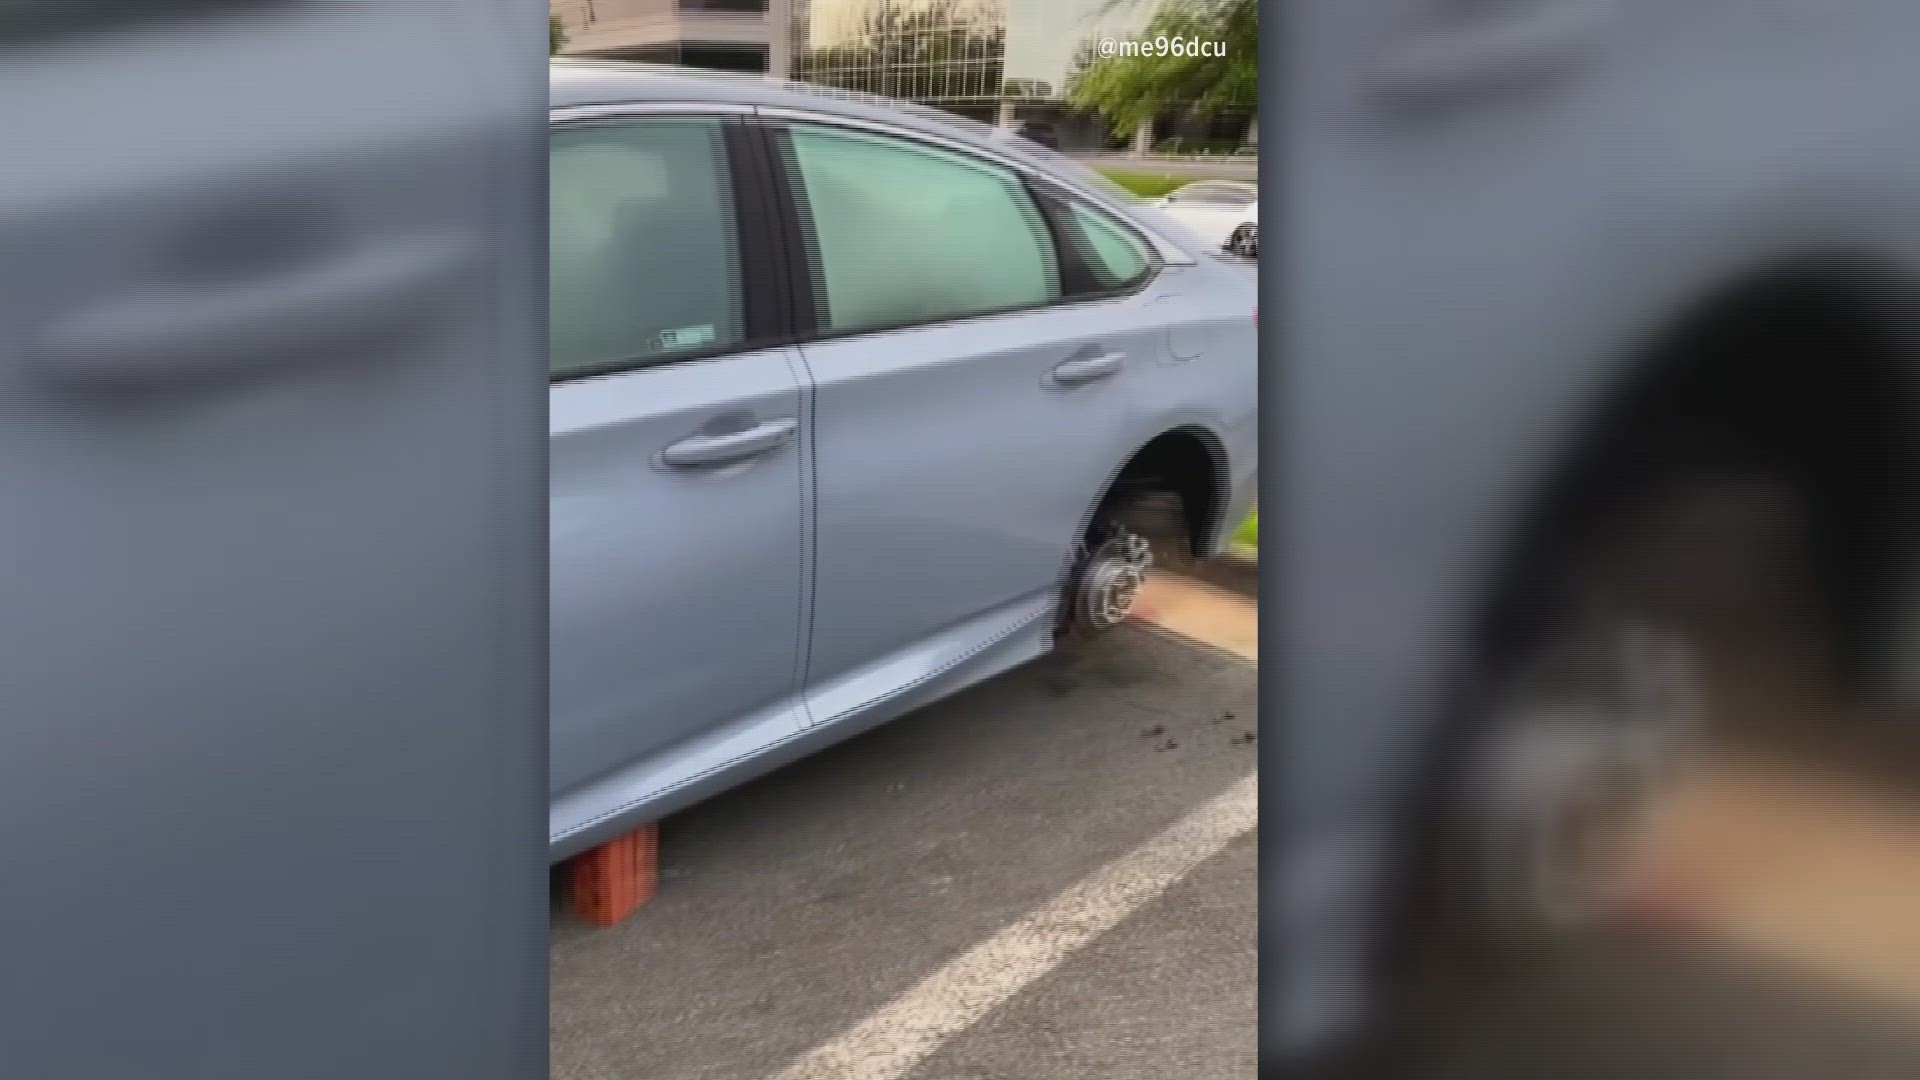 Police say tires were stolen off of four vehicles on May 10.